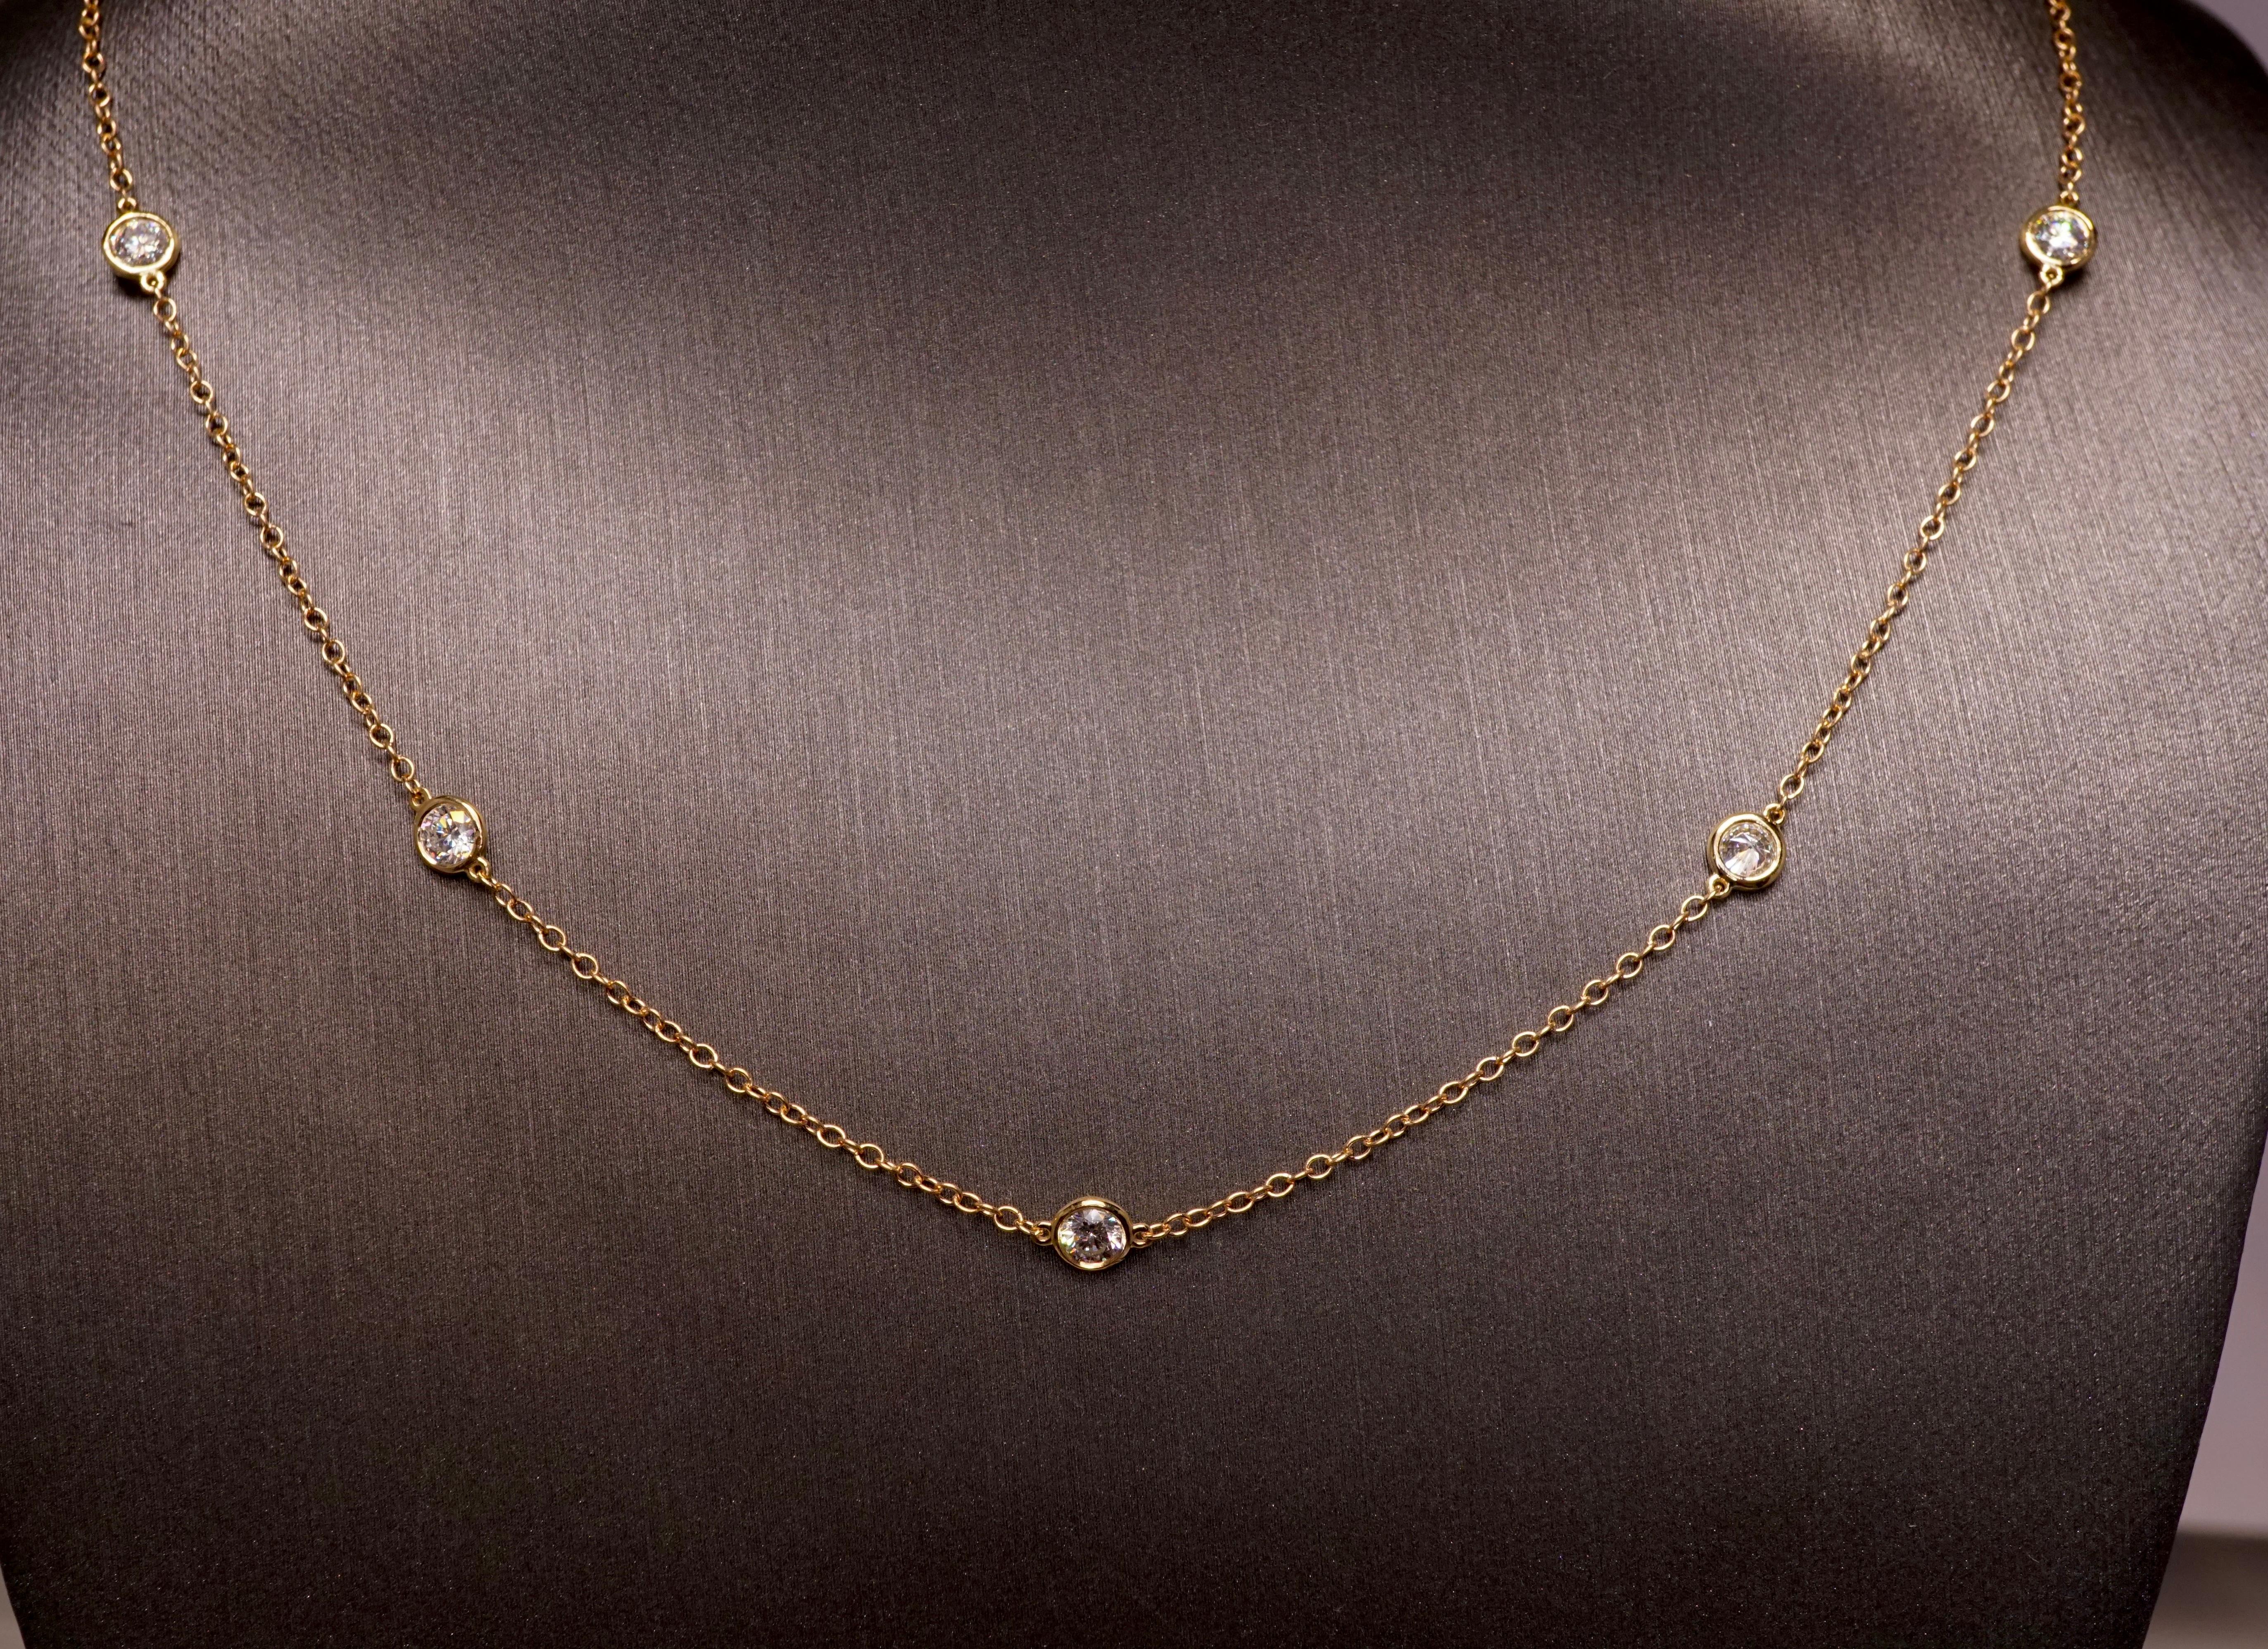 Round cut diamond necklace with 5 bezel set round diamonds set in 14K Yellow gold. Round Brilliant diamonds are F-G VS2-SI1 . Total Carat weight = 2.80ct. Poids total 1.8 grammes. Length is 16